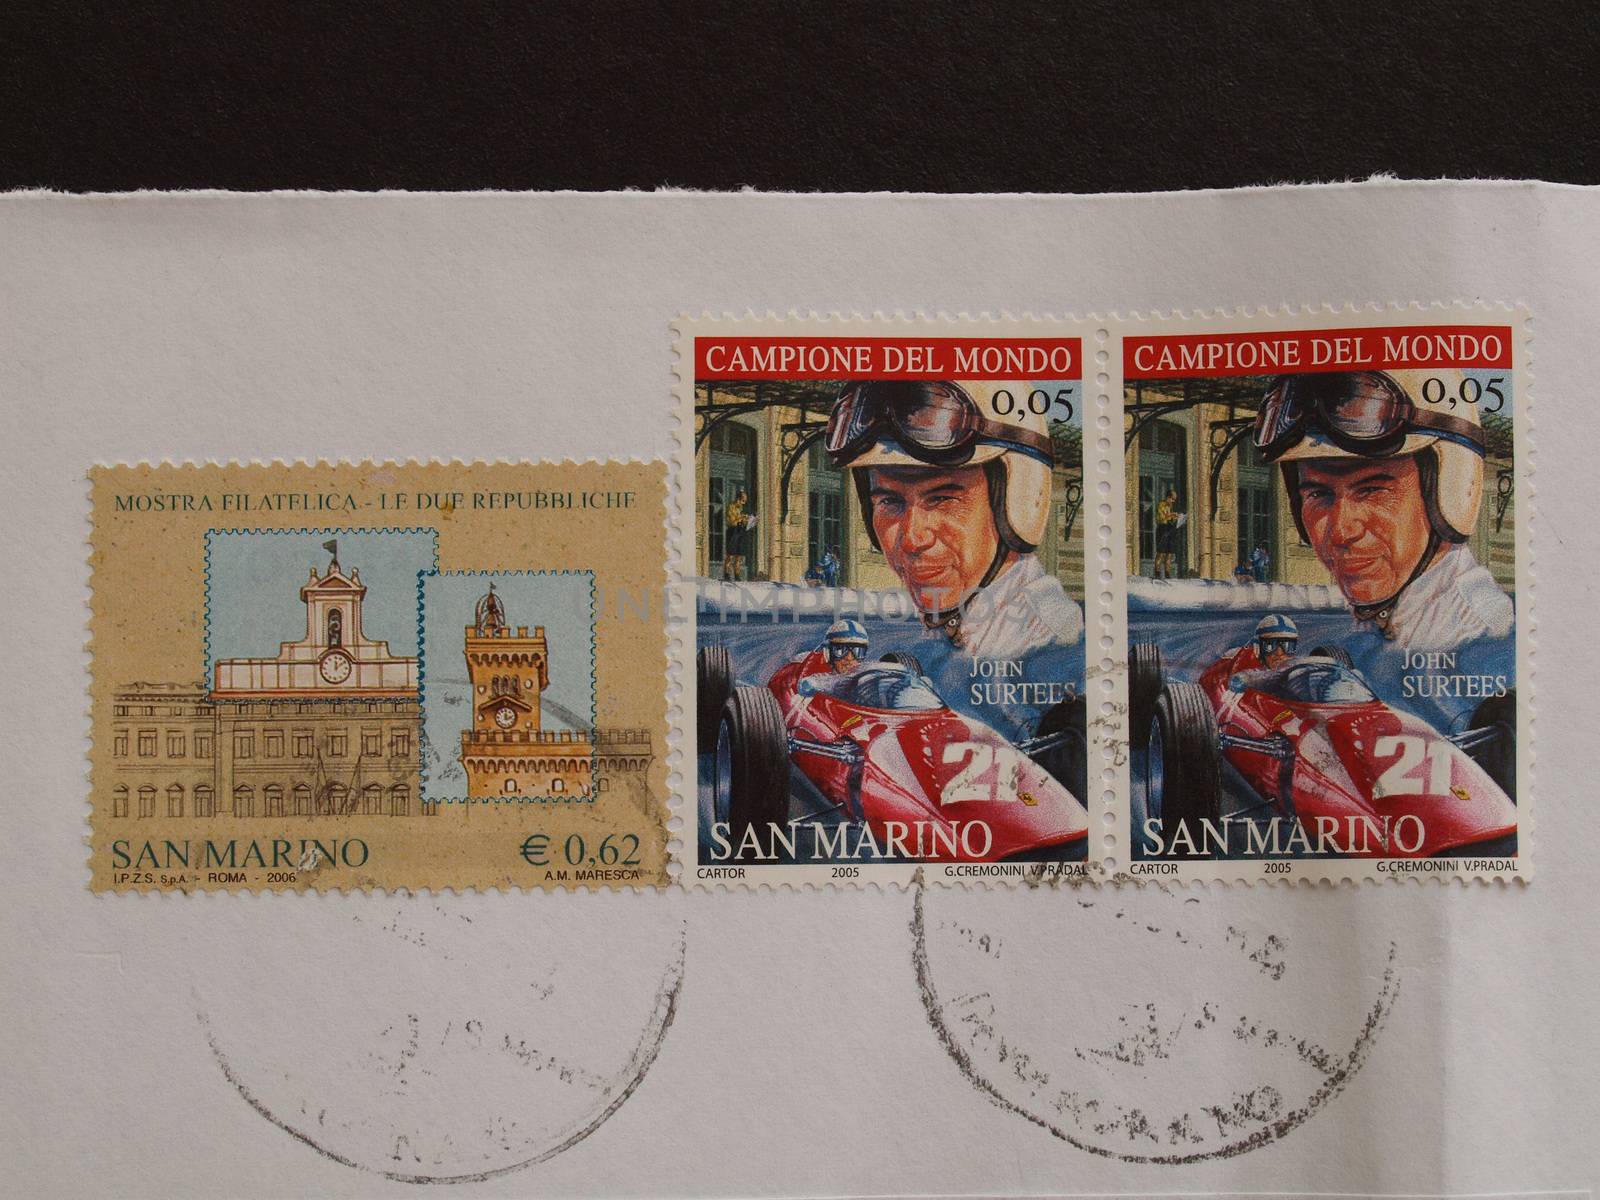 SAN MARINO - CIRCA JULY 2014: Postage stamps printed in San Marino show relationships between Itzaly and San Marino (Le due repubbliche, the two republics) and John Surtees world car race champion